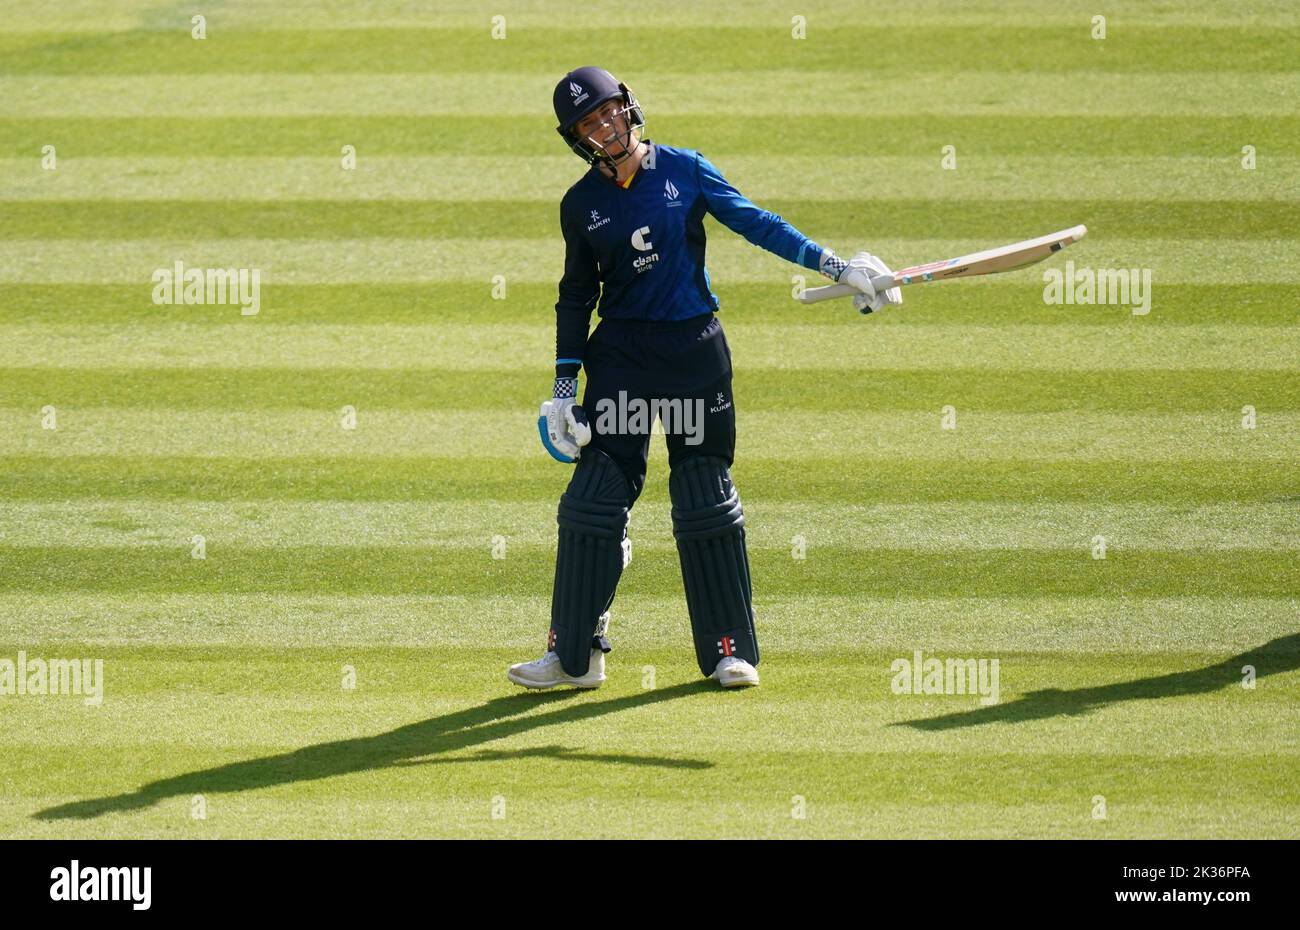 Northern Diamond's Lauren Winfield-Hill celebrates reaching her half century during the Rachael Heyhoe Flint Trophy Final at Lord's, London. Picture date: Sunday September 25, 2022. Stock Photo